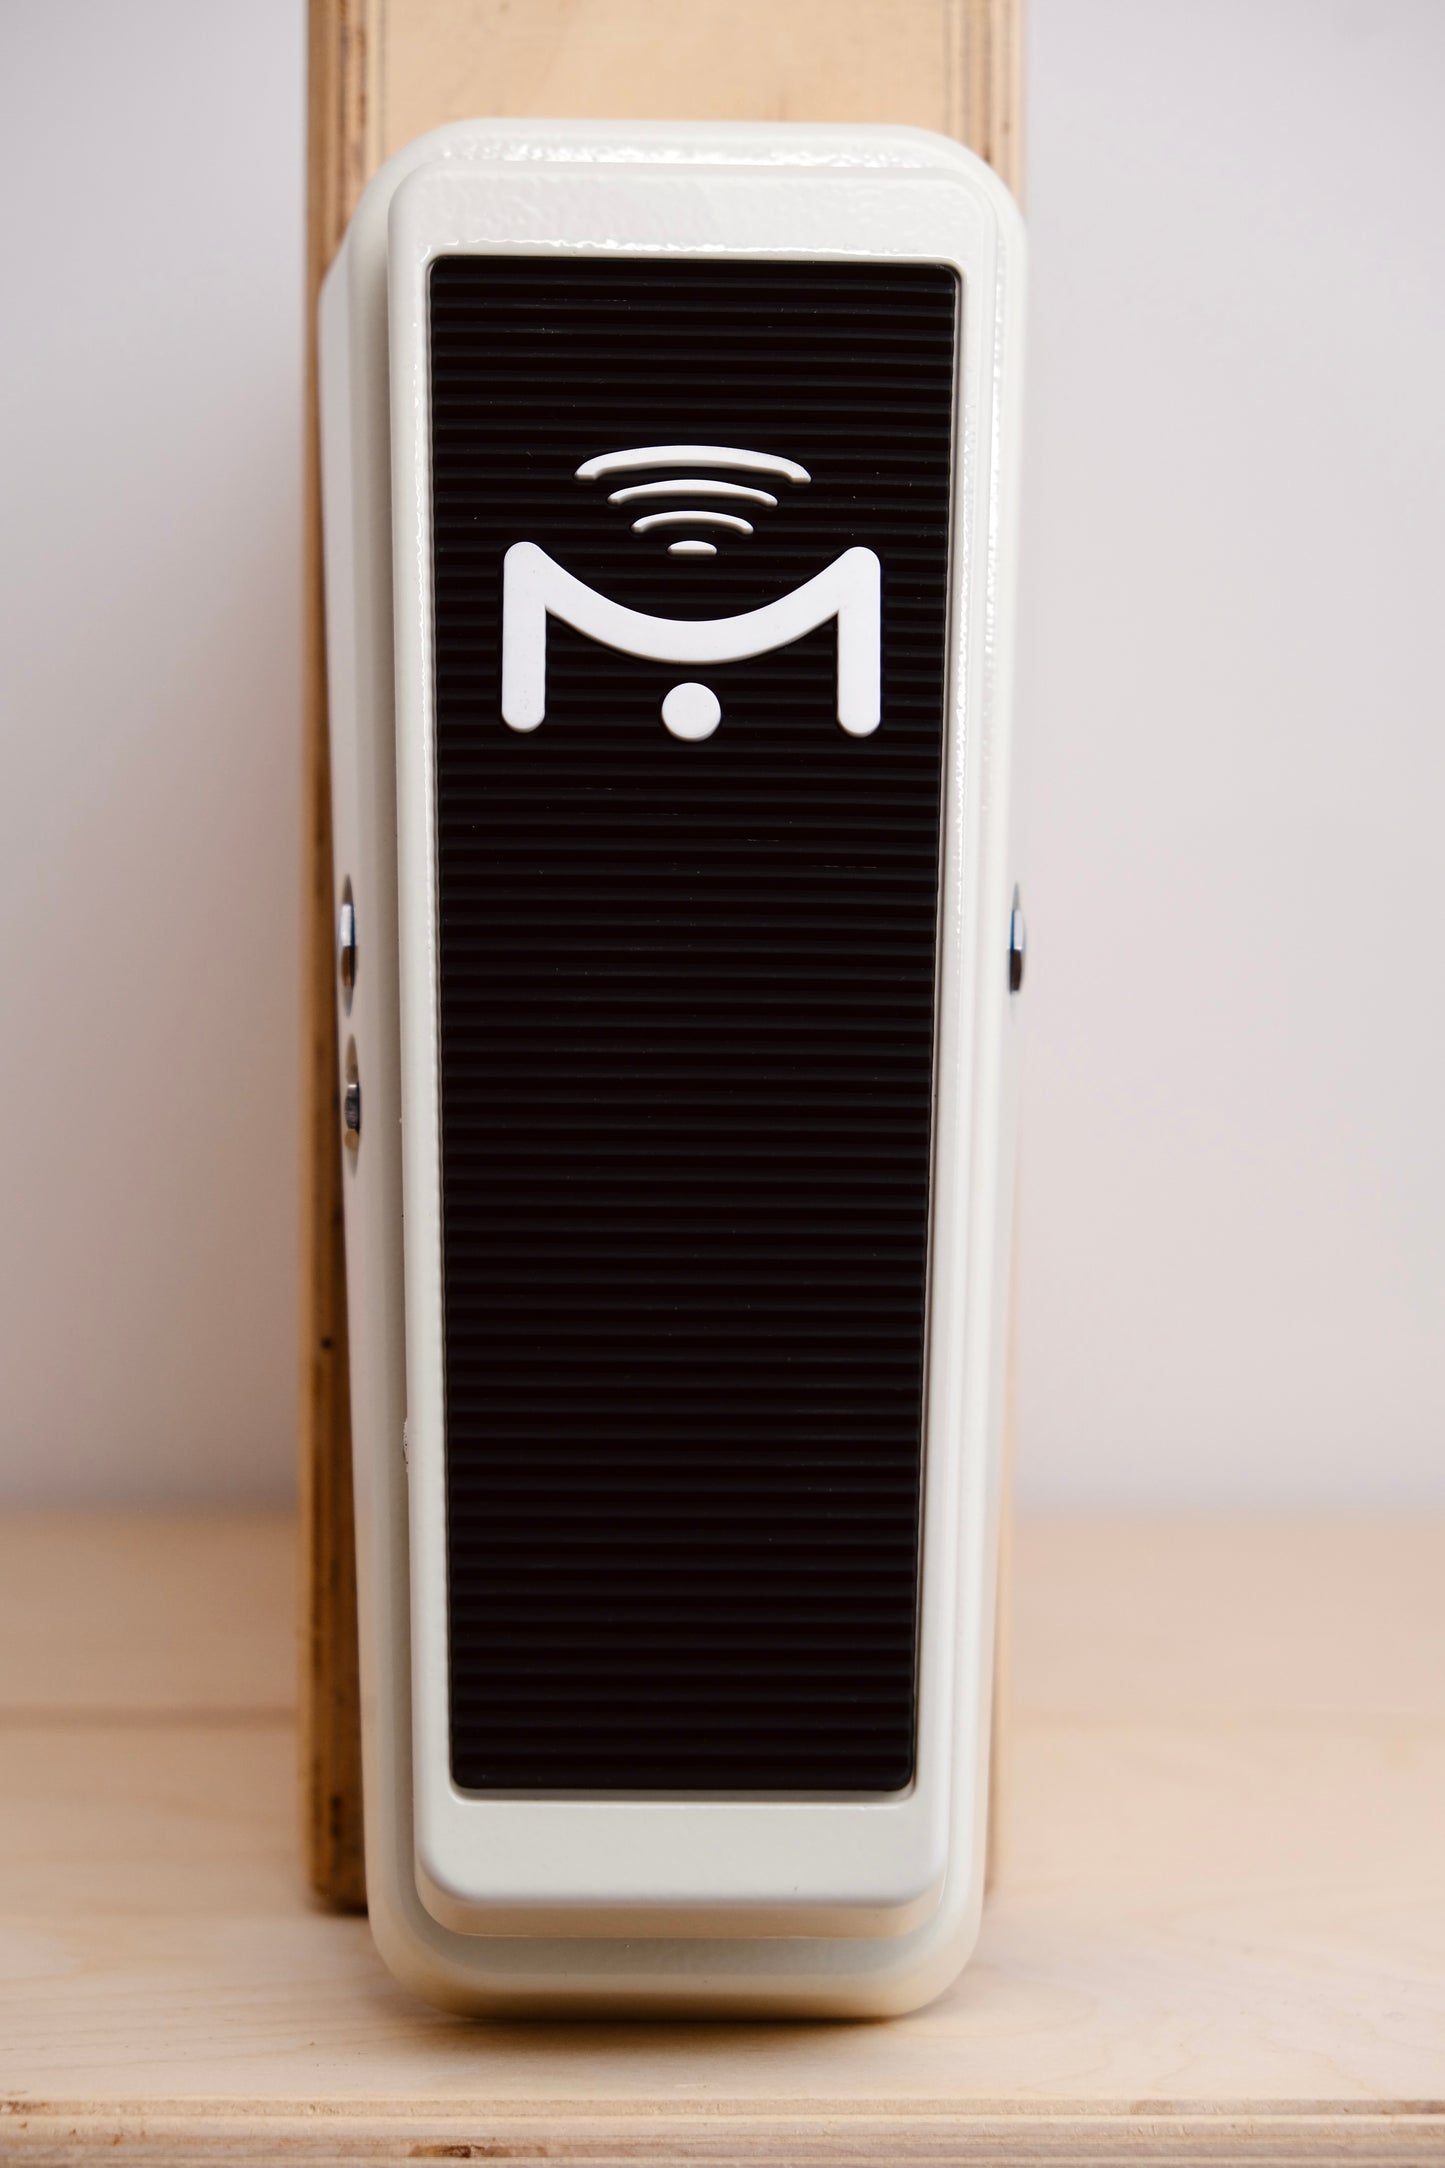 Mission Engineering VM-PRO-OW Volume Pedal